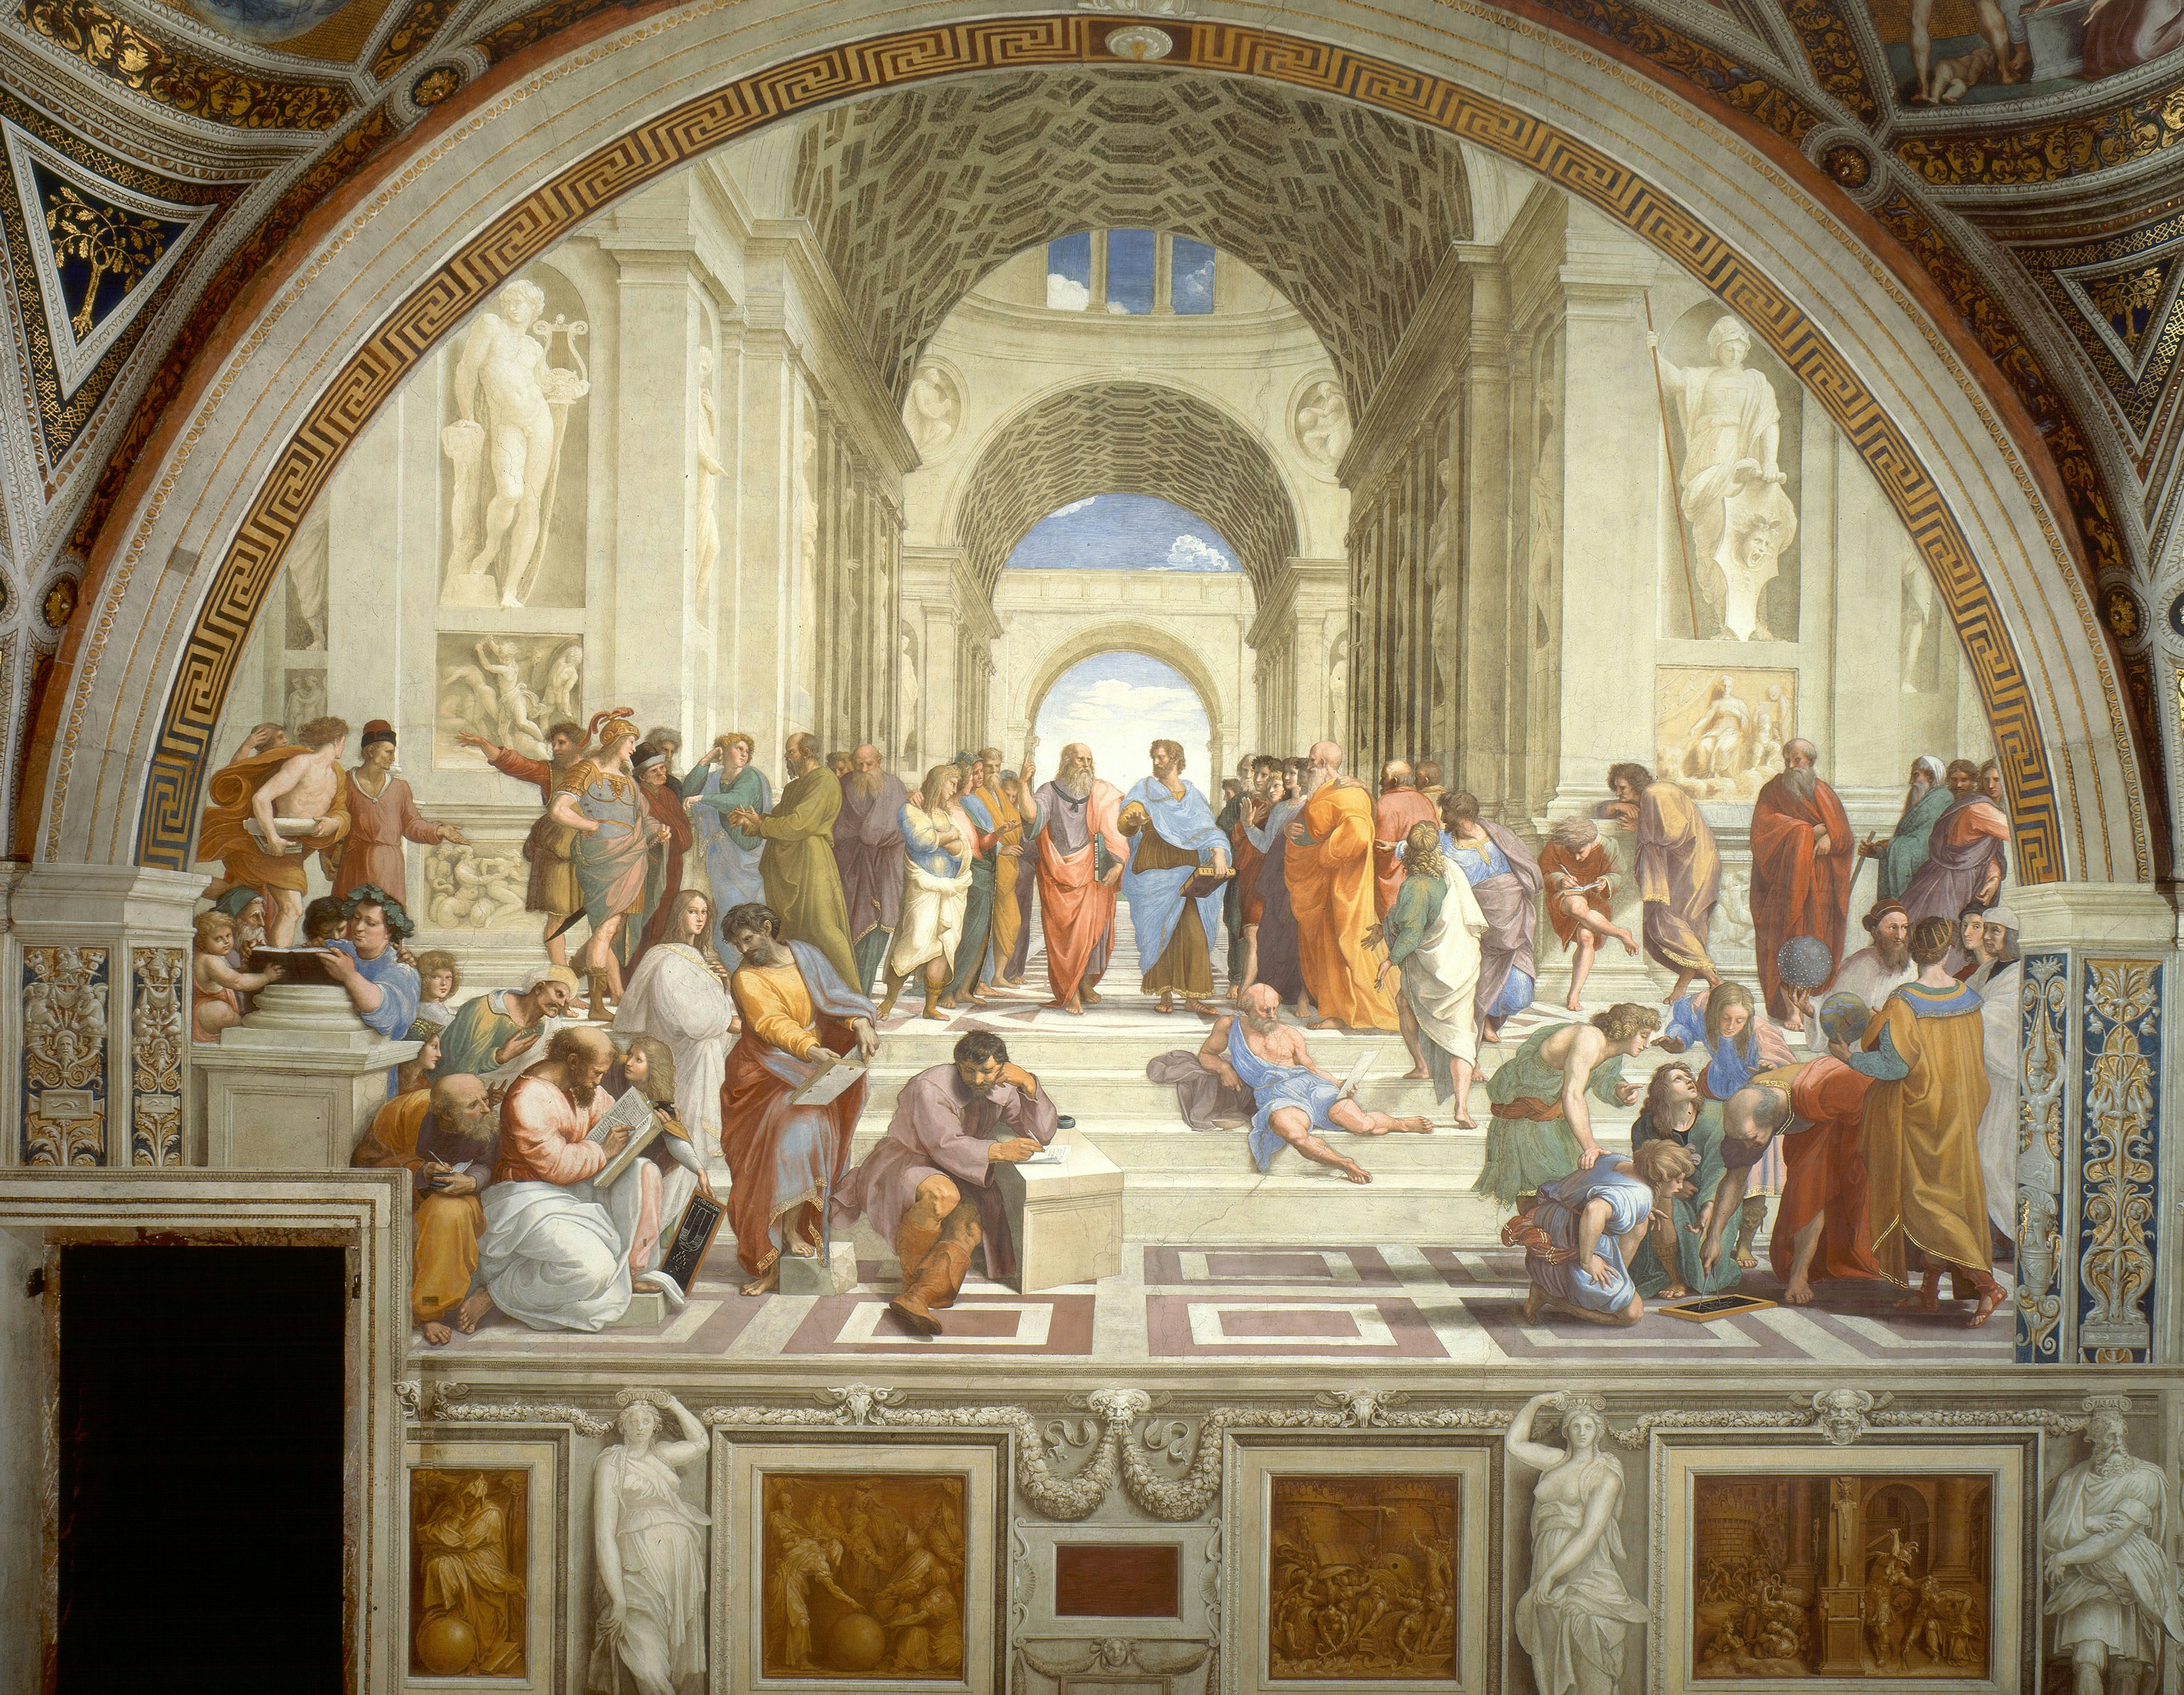 The School of Athens, Raphael, 1509–1511. Raphael depicted the Renaissance not as a static revival of antiquity, but rather an impossible conversation between ancients; cloaked in the skin of his most talented contemporaries; housed in one of the most daring and innovative architectural projects of his time